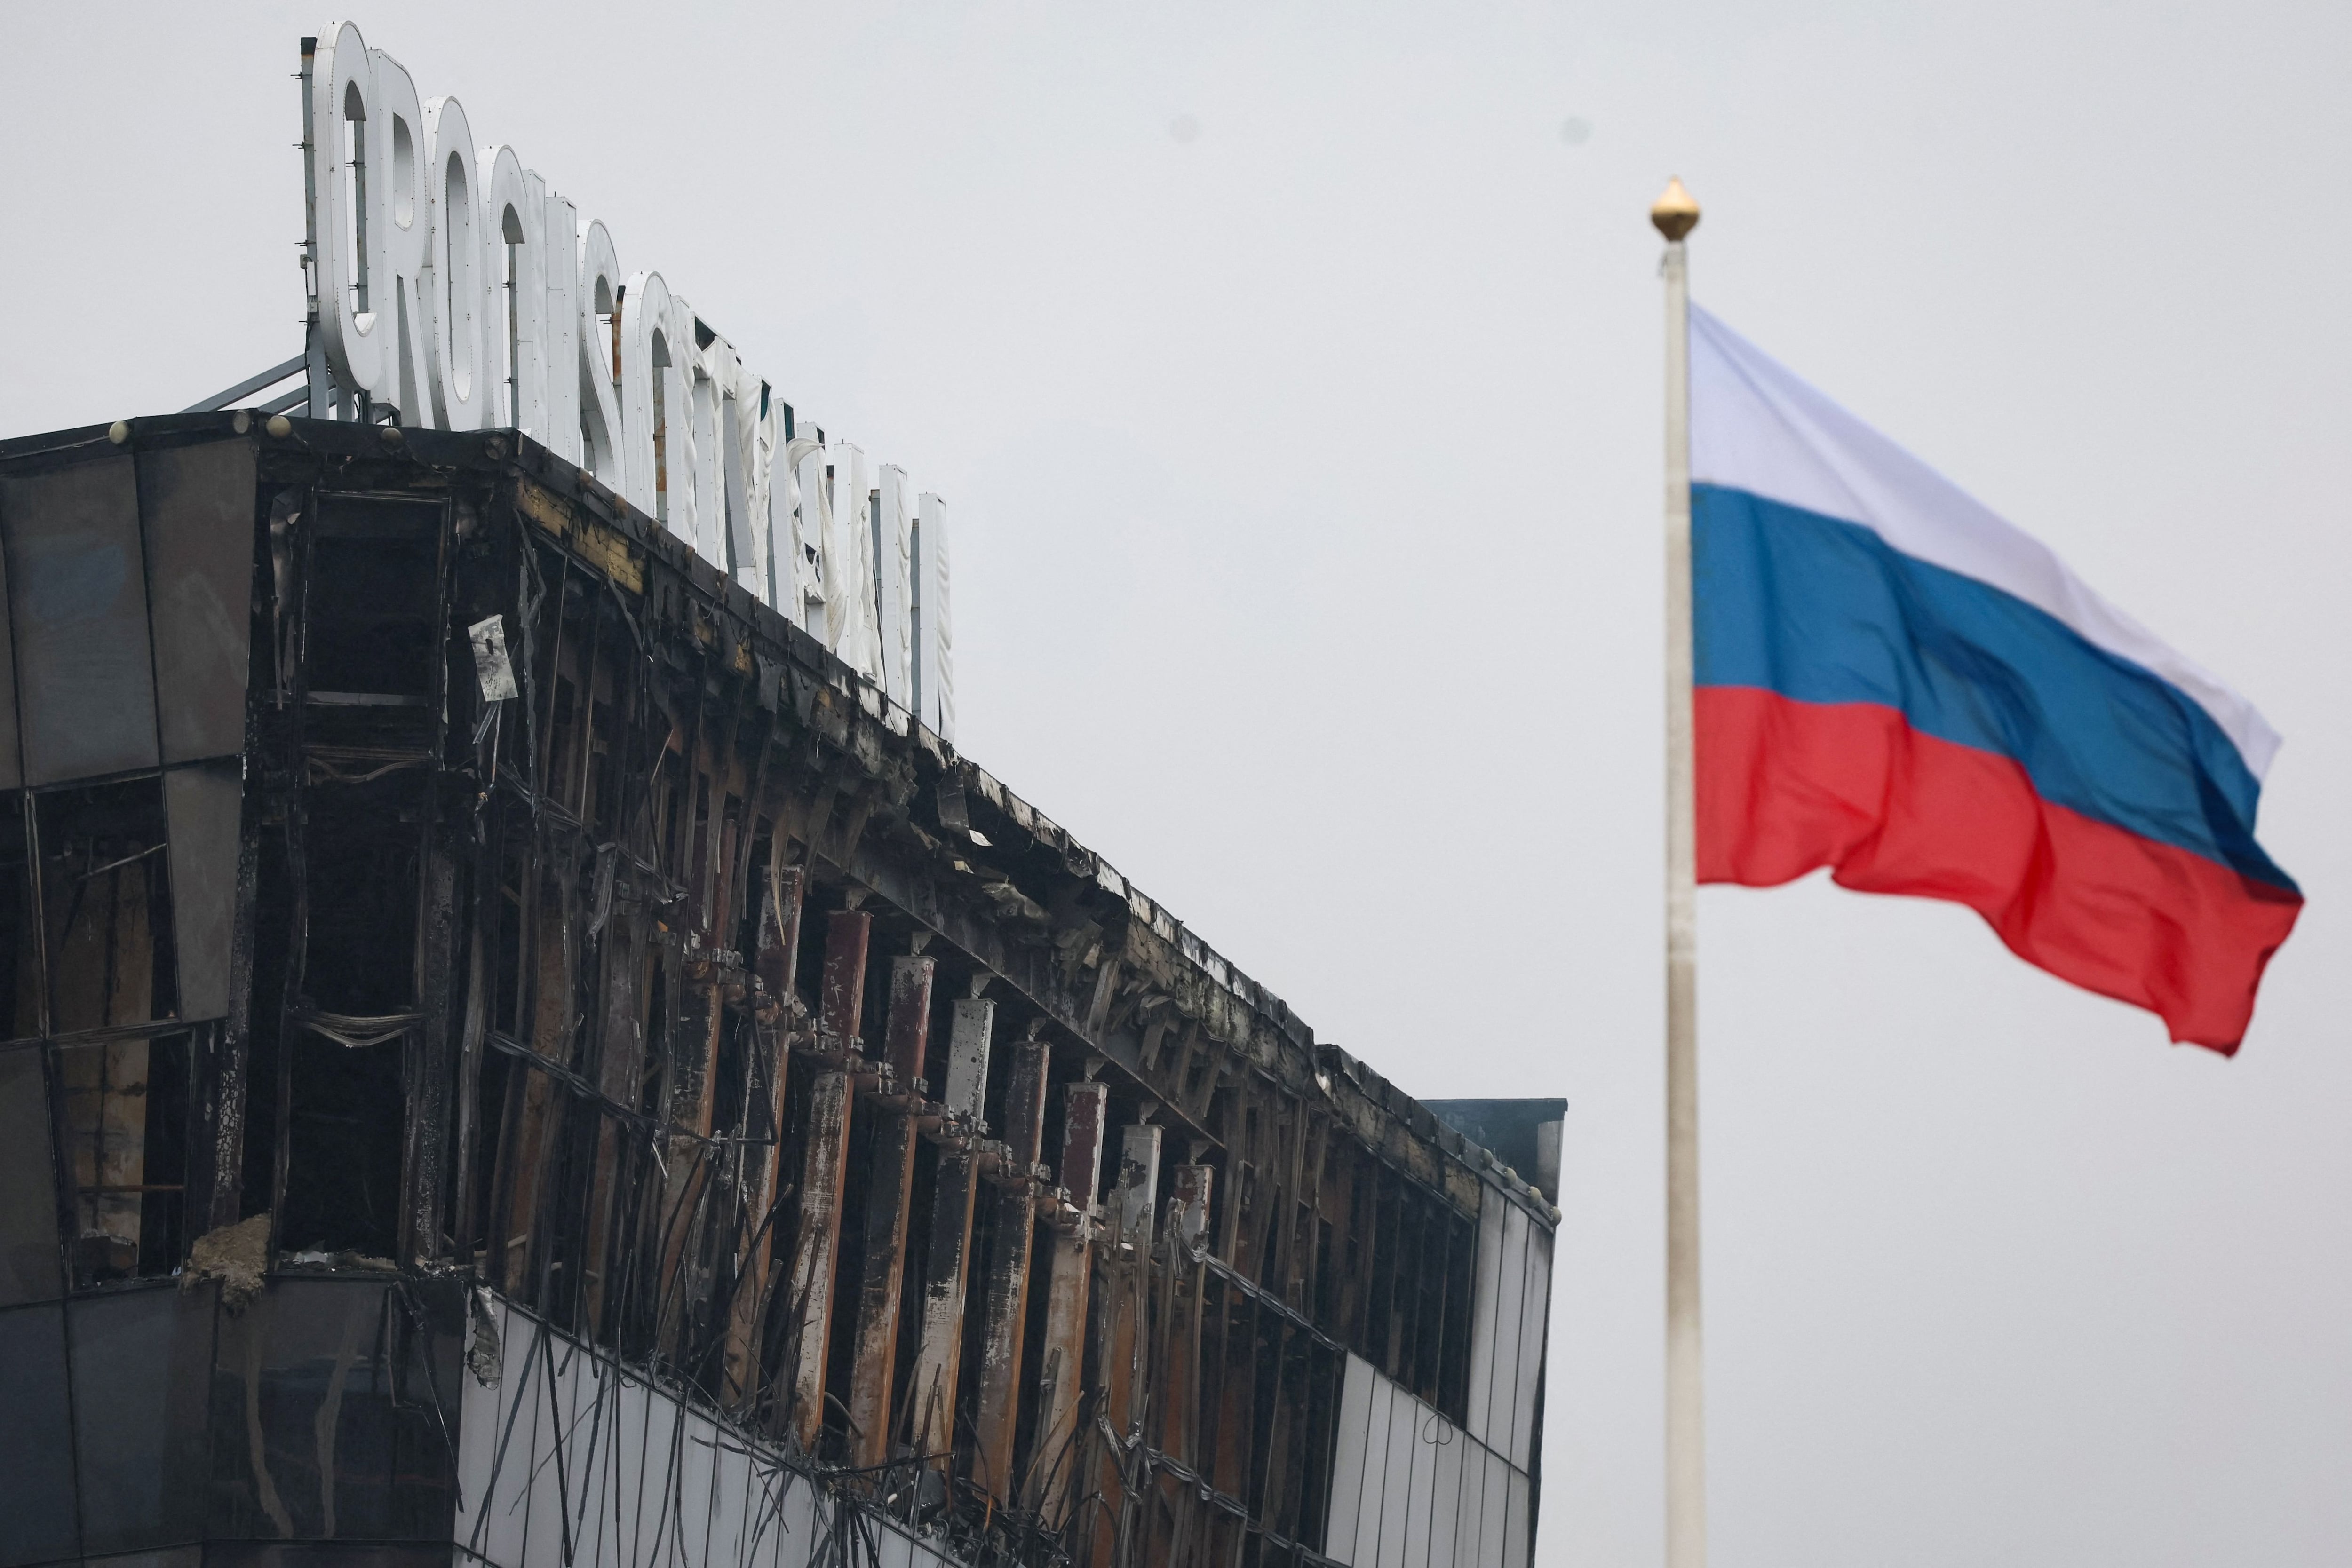 A Russian national tricolor flag flutters in the wind near the burned-out Crocus City Hall concert hall, the scene of the armed attack, in Krasnogorsk.  (Photo by STRINGER/AFP).